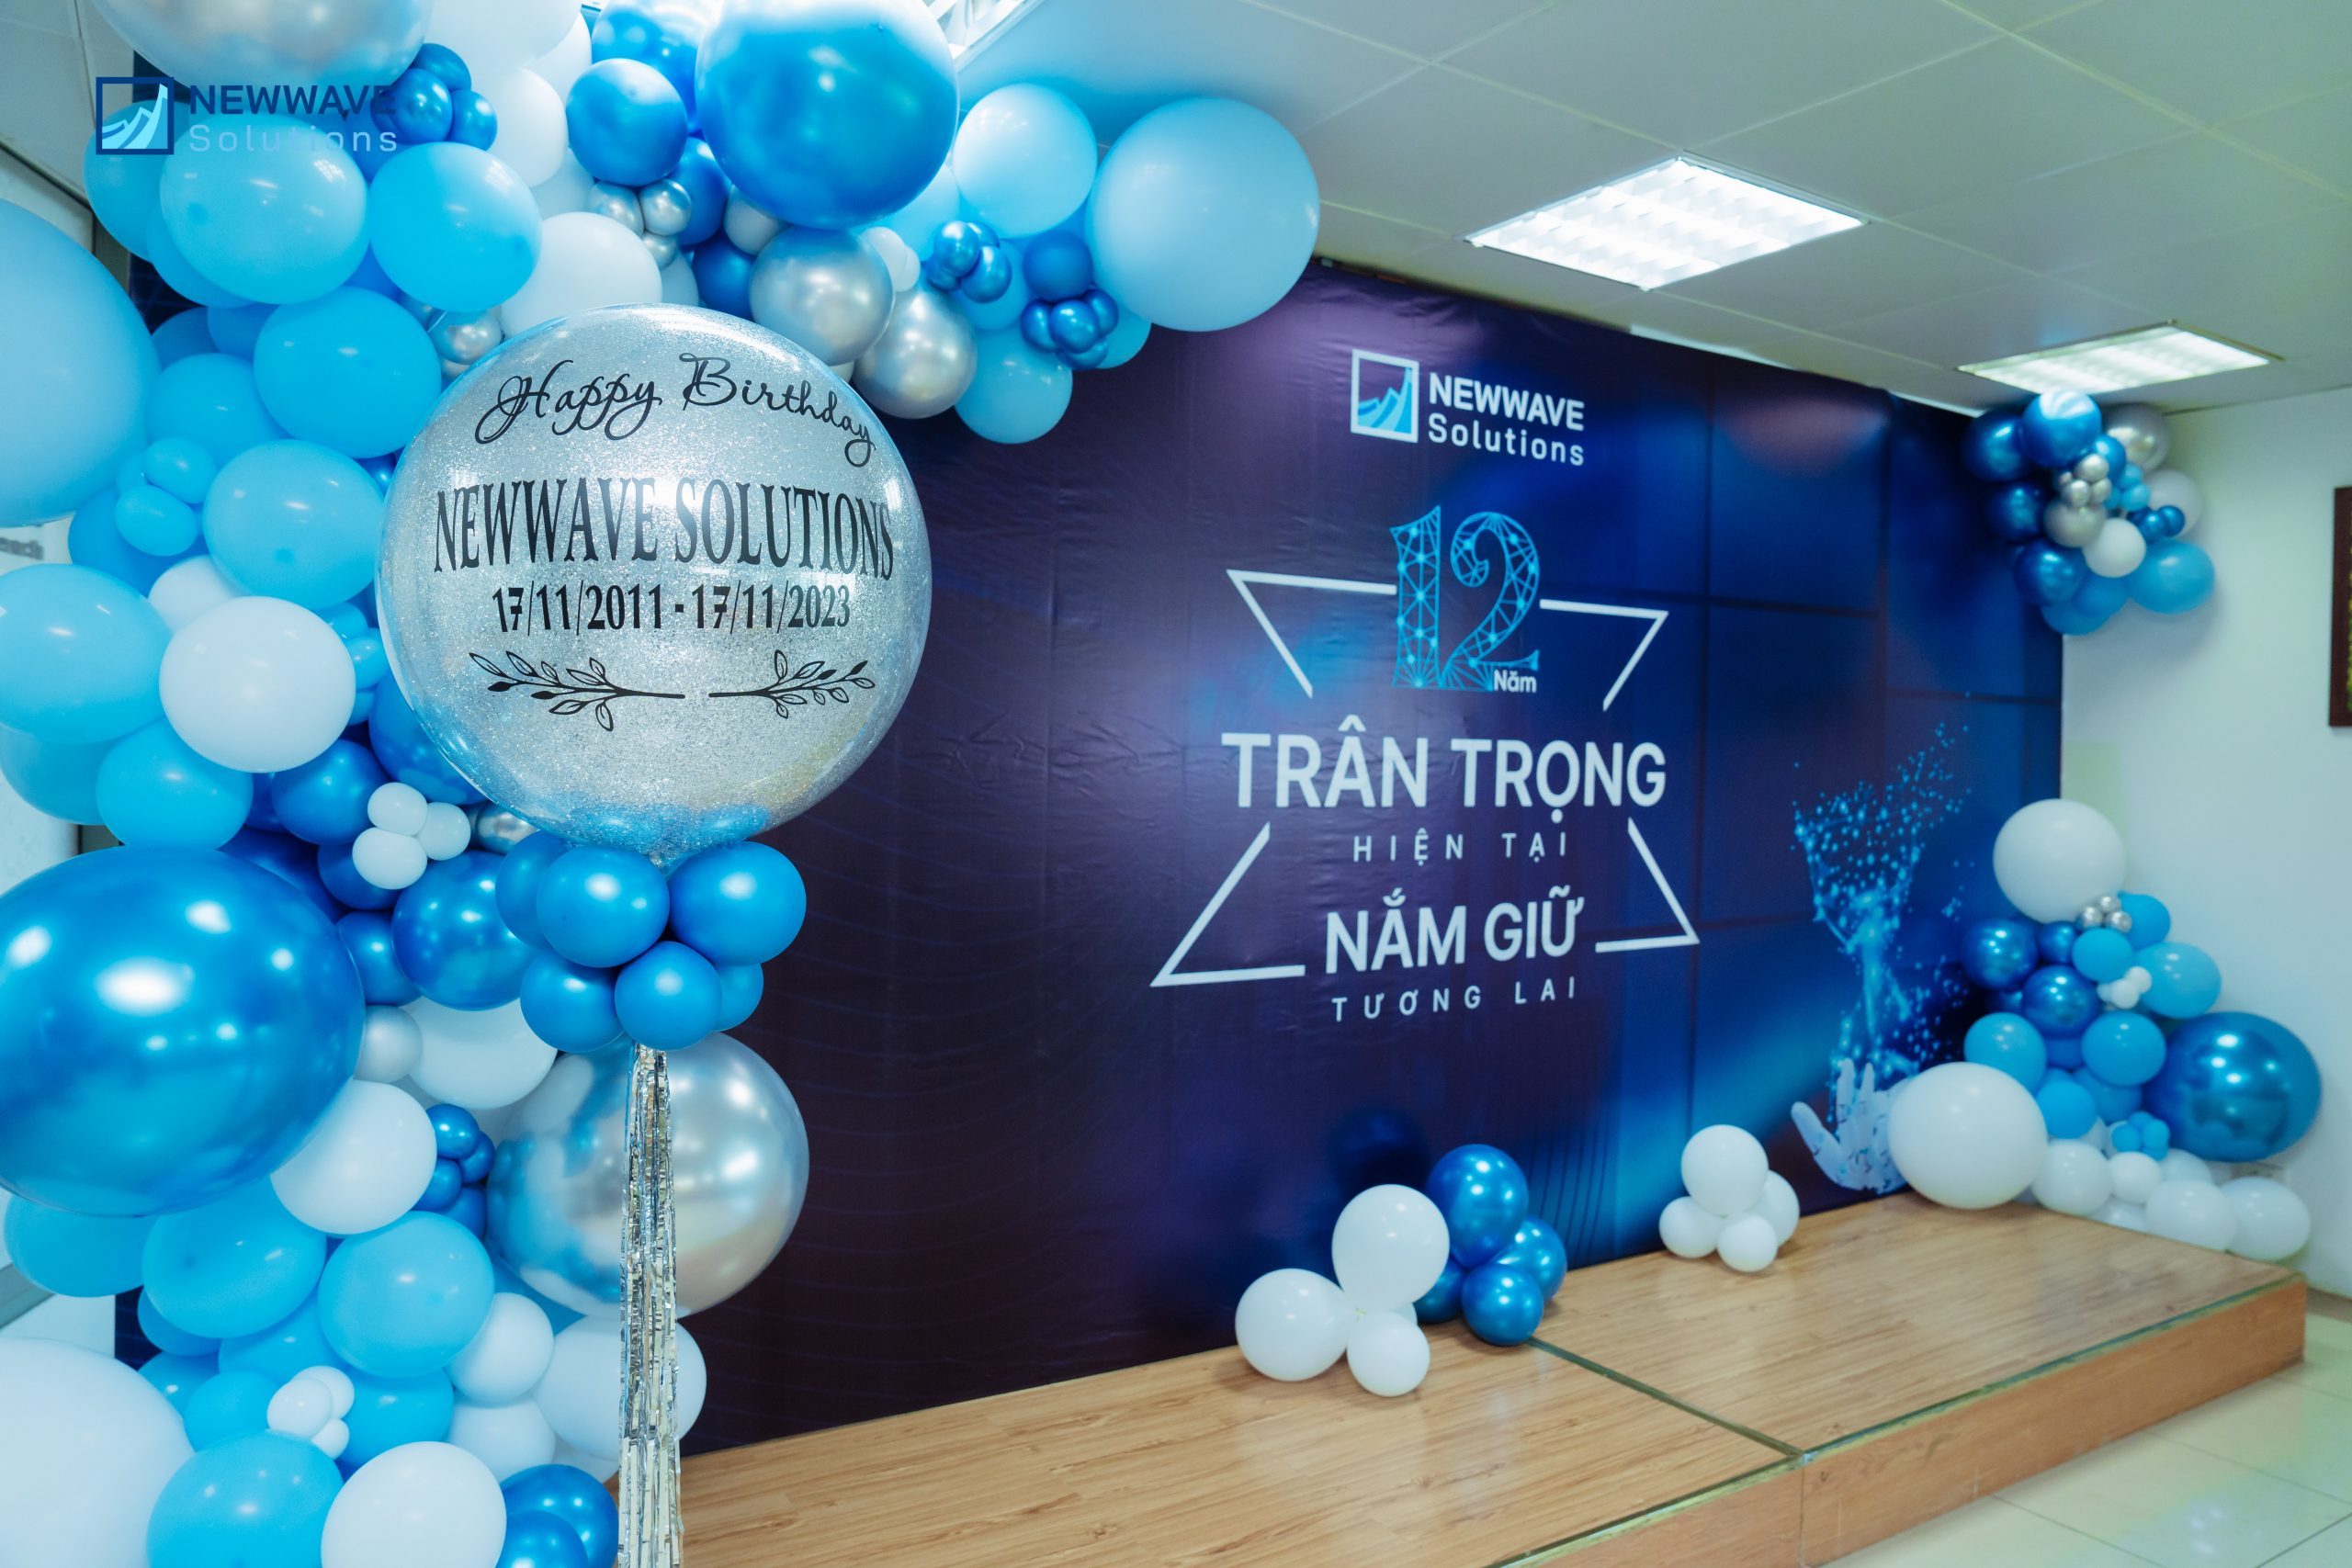 Newwave Solutions - 12th Anniversary